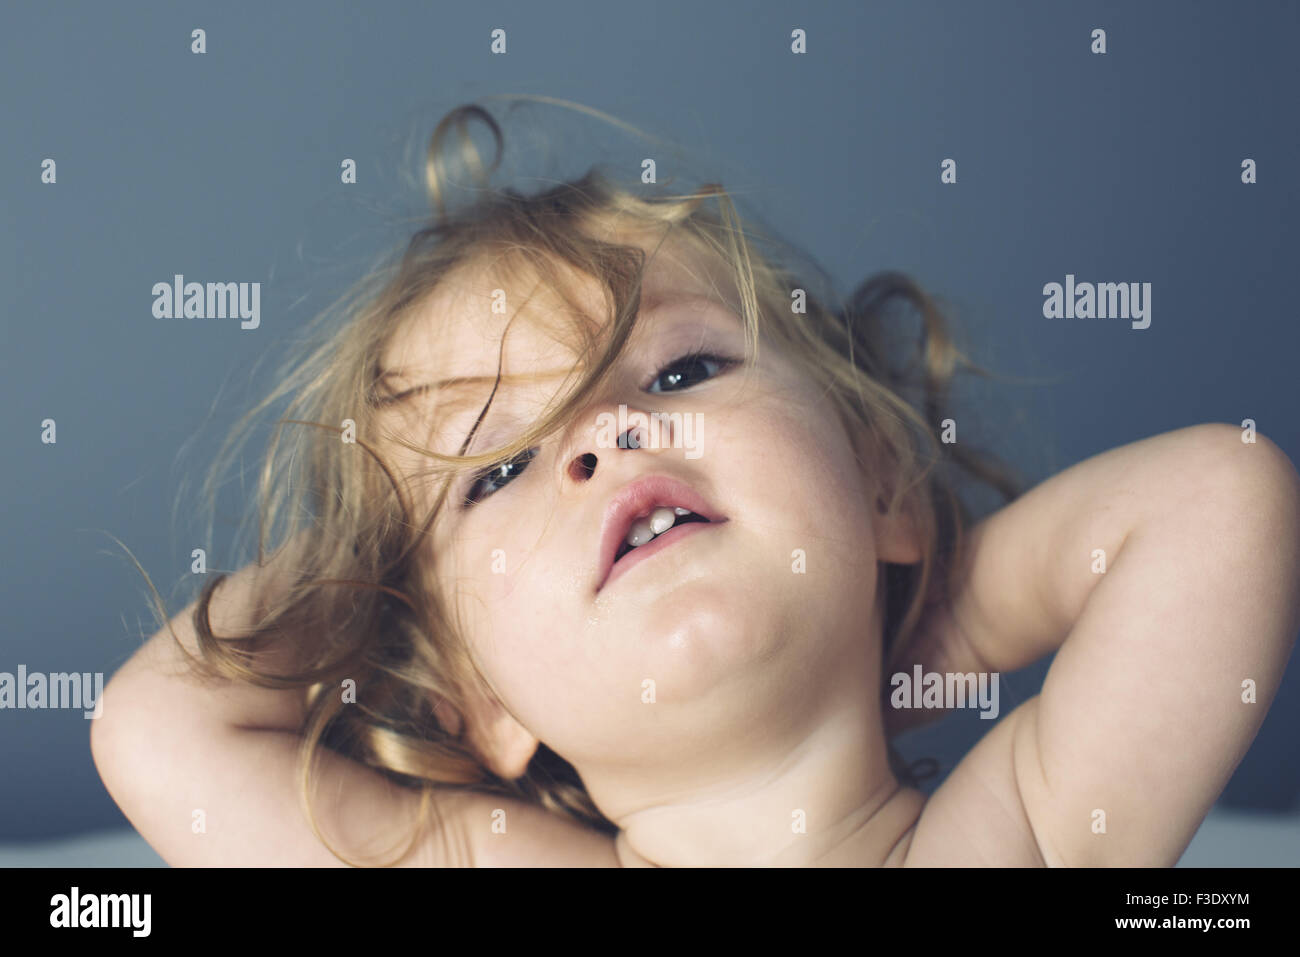 Baby girl with hands behind head, portrait Stock Photo